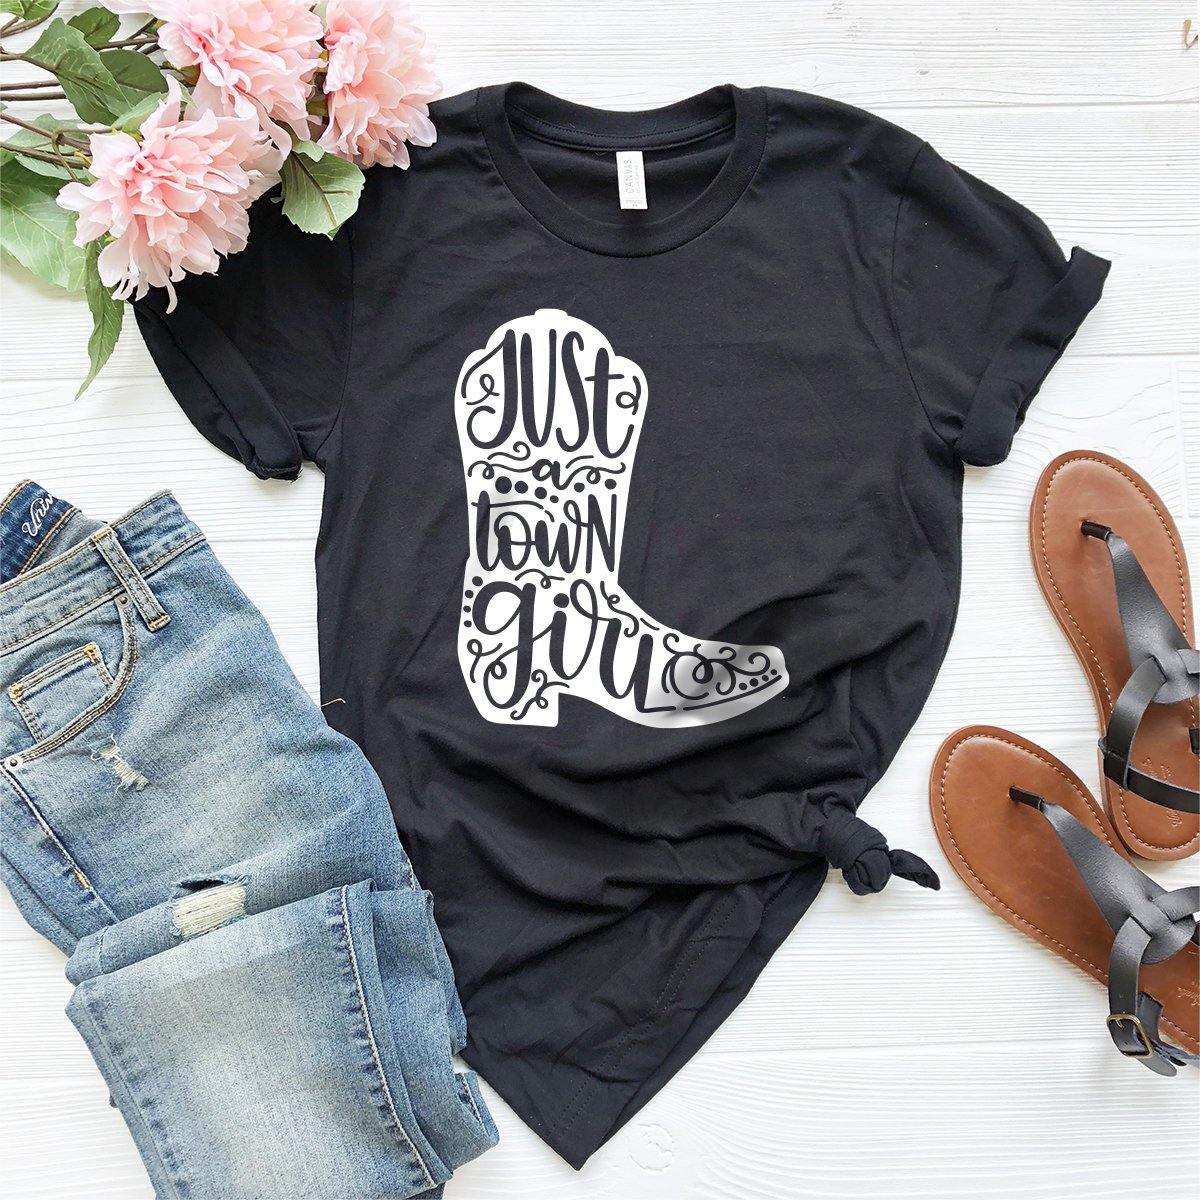 Cowgirl Boots Shirt, Country Shirt, Western Girl Shirt, Country Girl Shirt, Southern Girl Shirt, Southern Shirt, Just A Town Girl Shirt - Fastdeliverytees.com